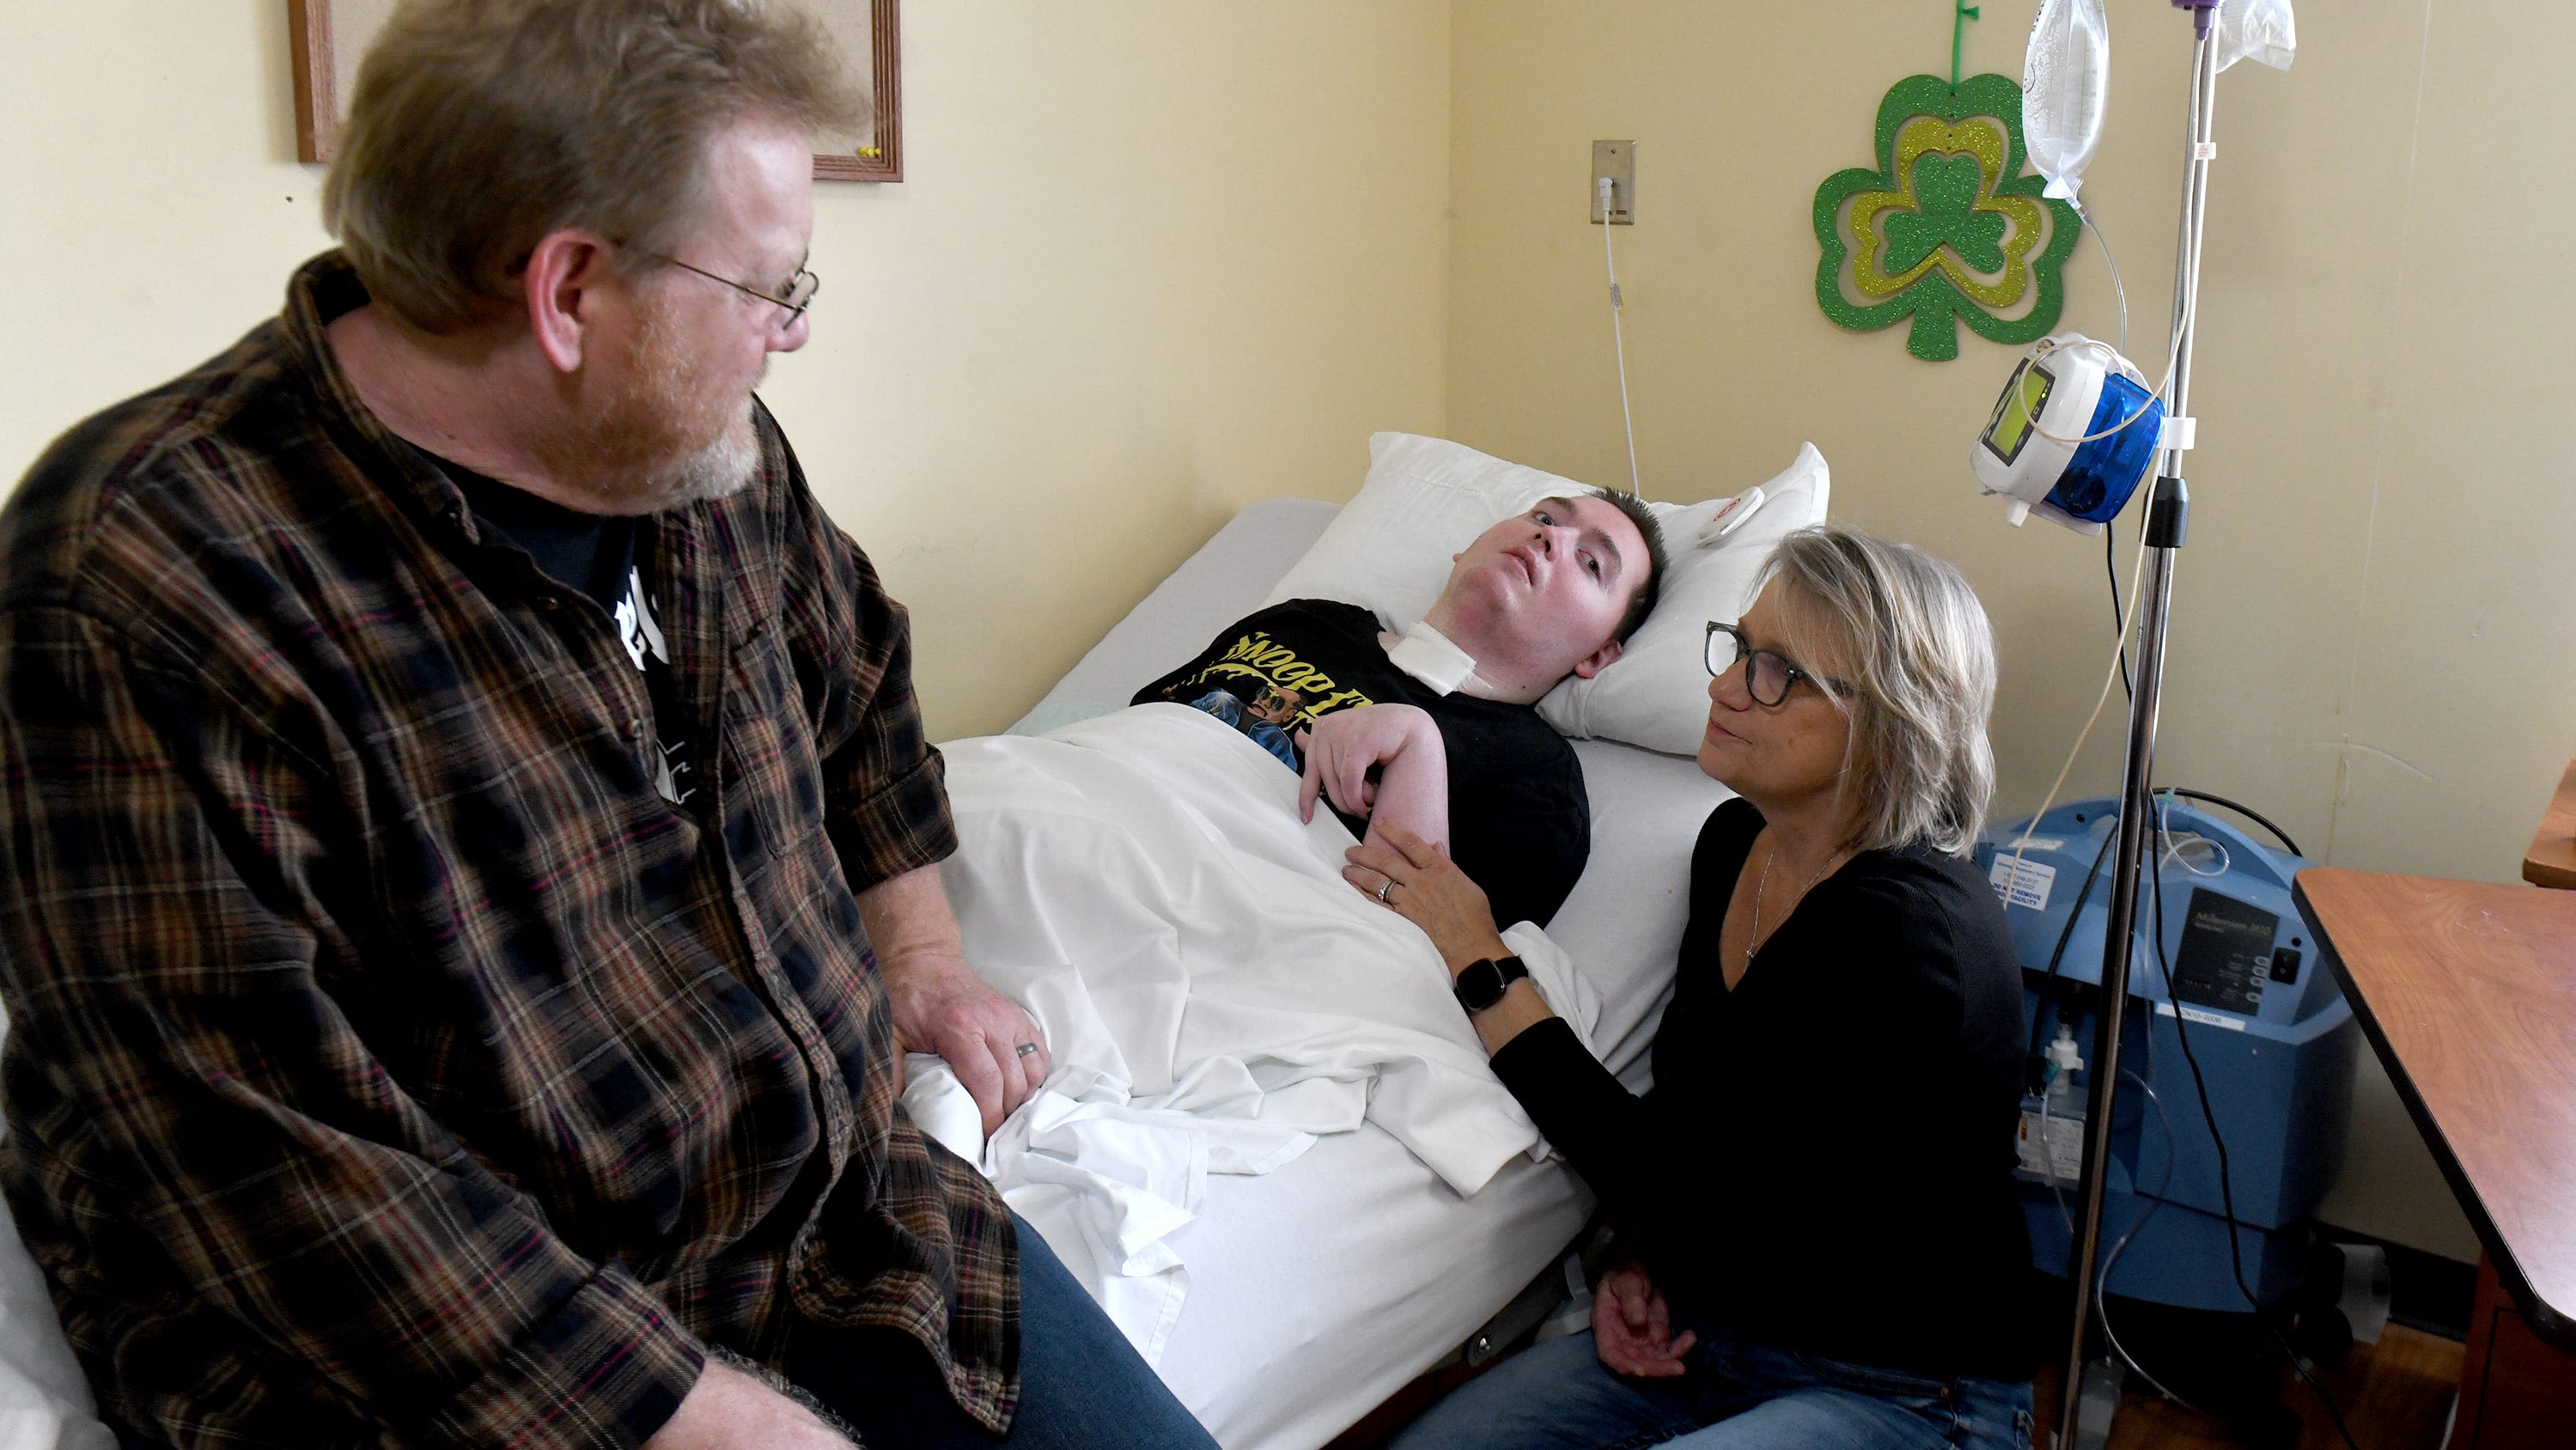 'He's still my son. ... He exists.' Kalvyn Stull is stuck between life and death